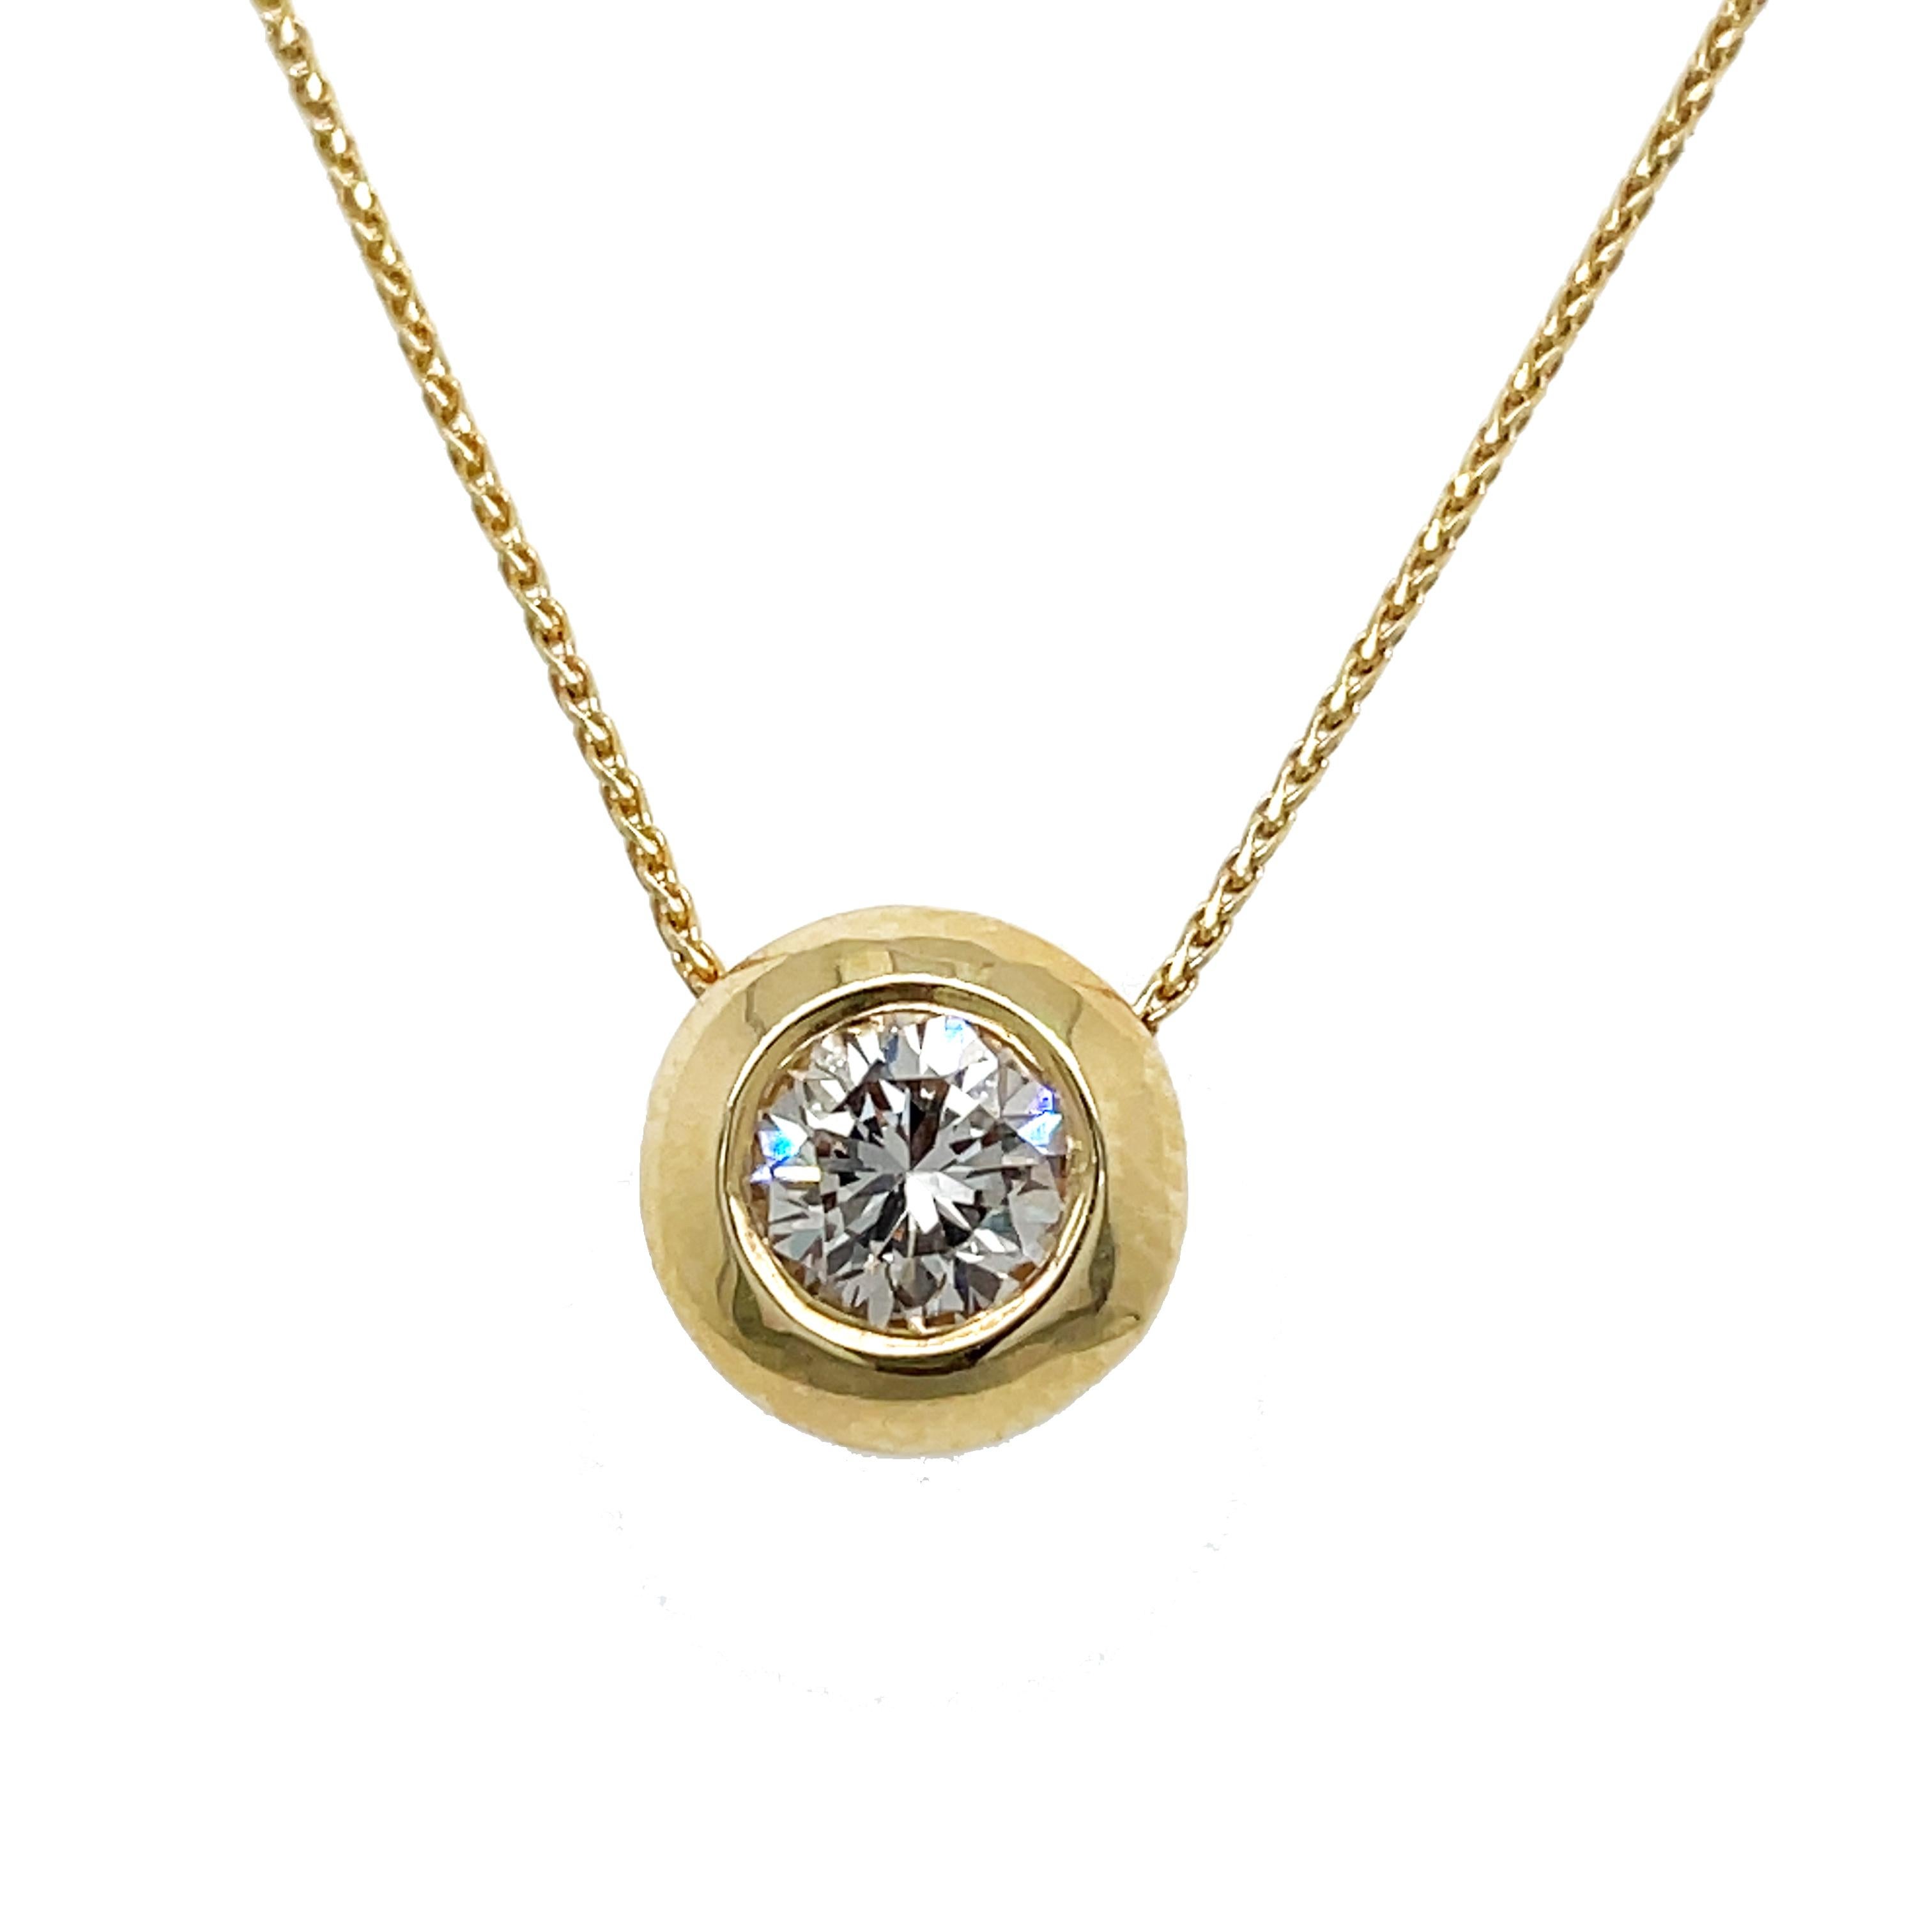 This is a classic 14K yellow gold necklace that features a gorgeous sparkling bezel set diamond floating along the chain. This is the perfect way to celebrate any significant event, transition, or achievement in your life. This lovely necklace is